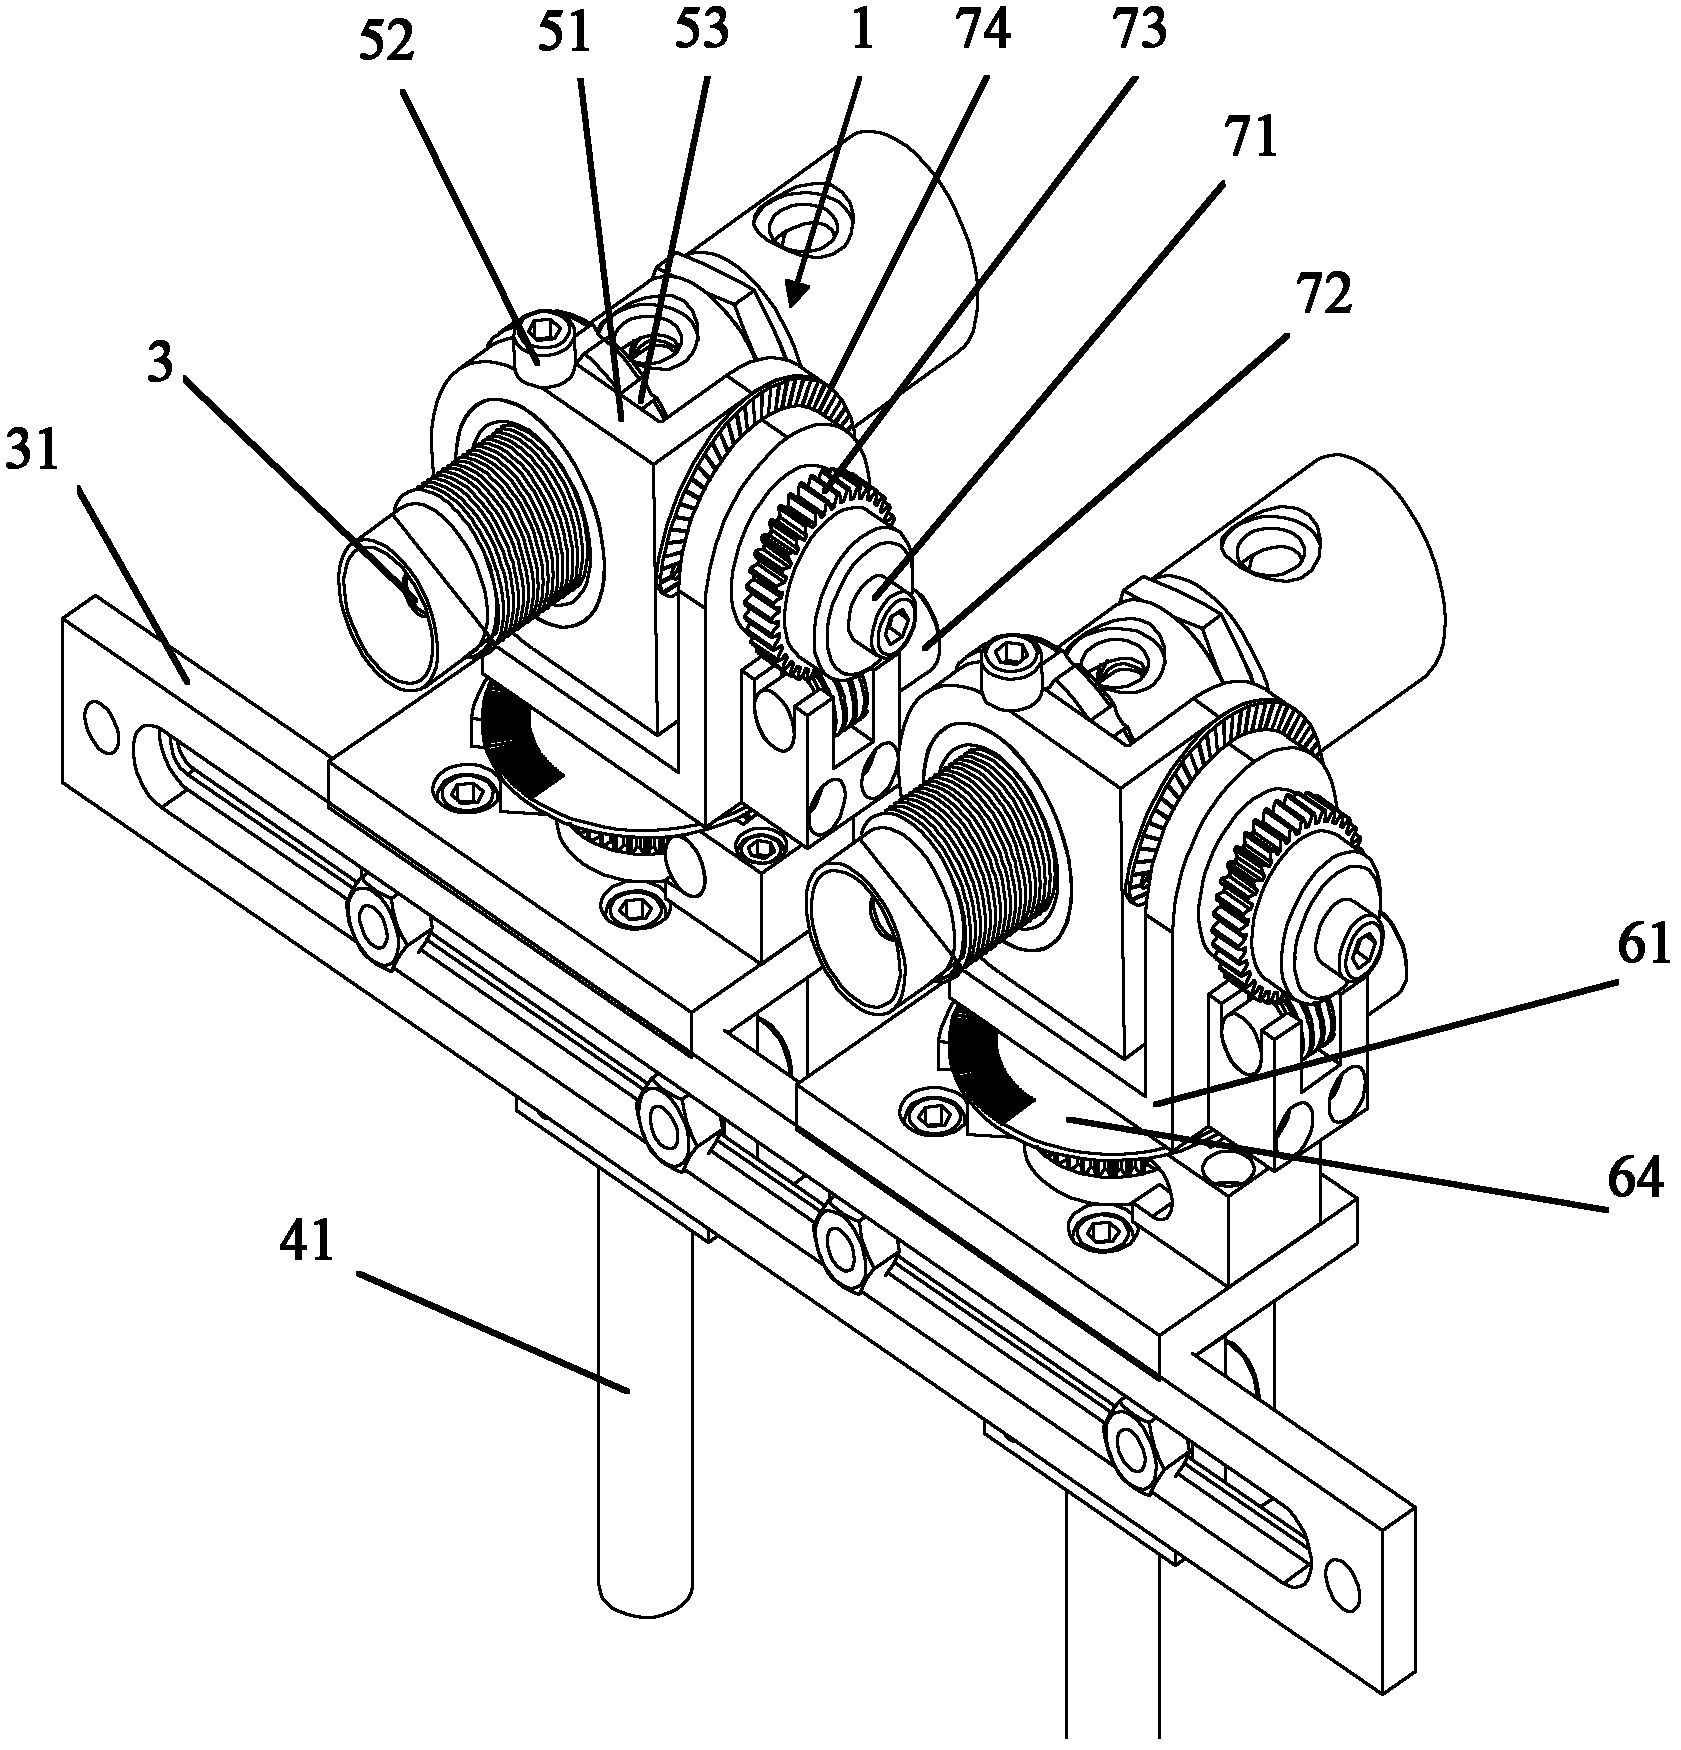 Nozzle three-dimensional positioning and angle adjusting device